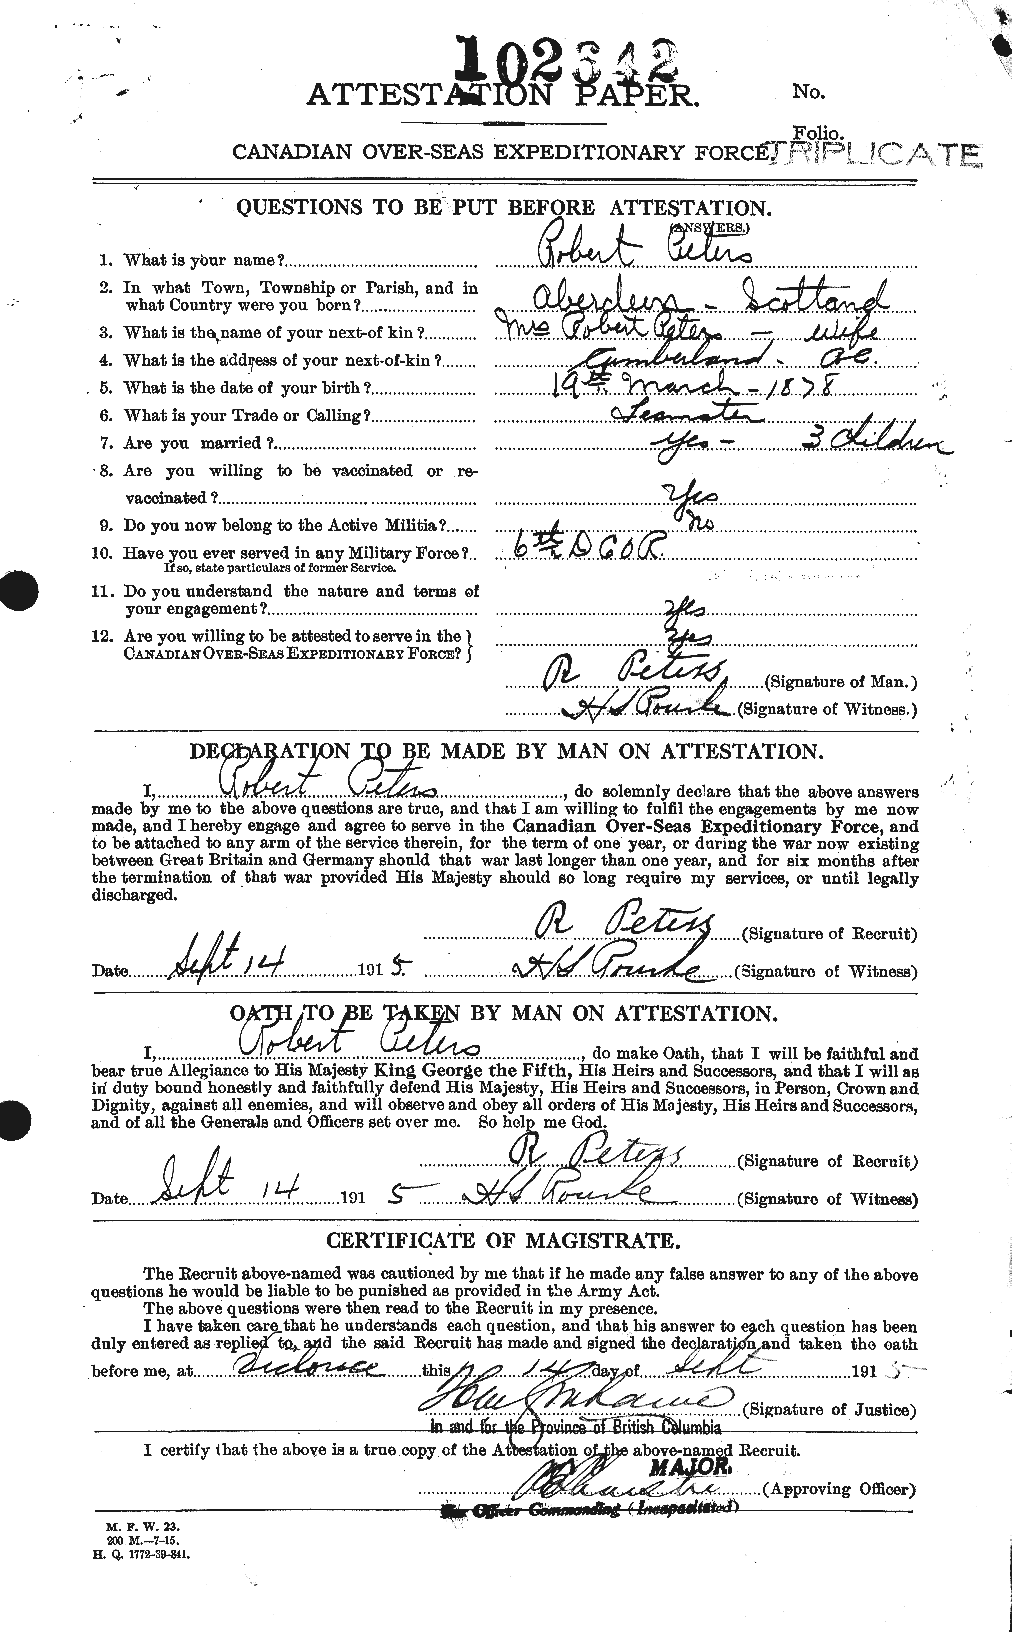 Personnel Records of the First World War - CEF 575608a